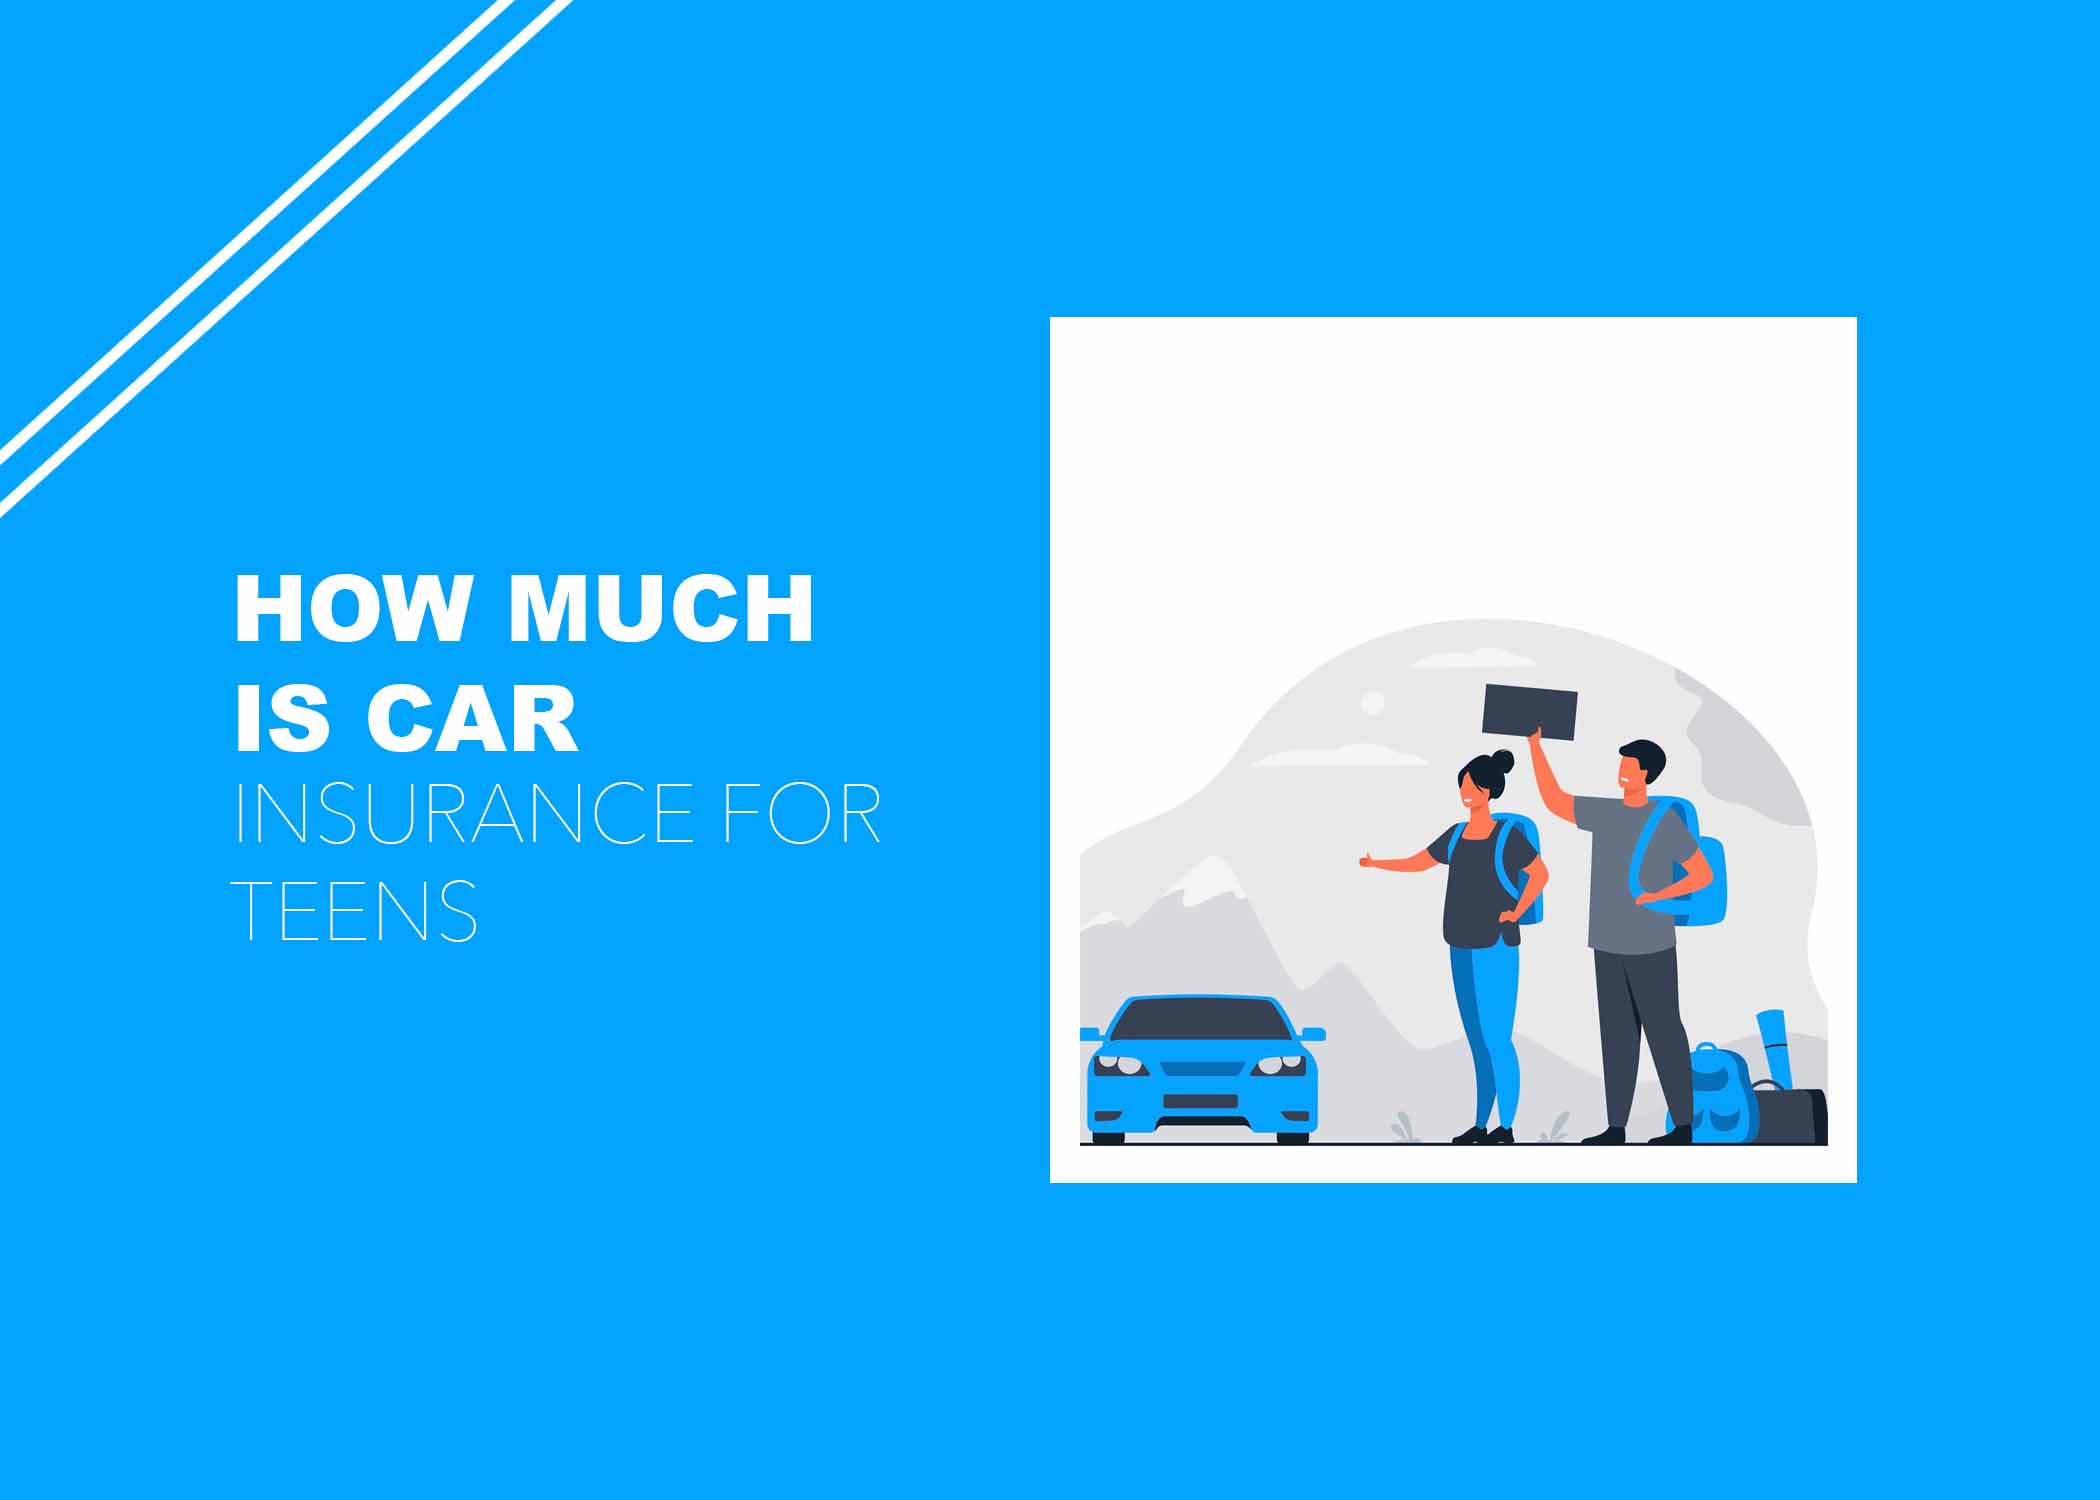 How Much Is Car Insurance for Teens?